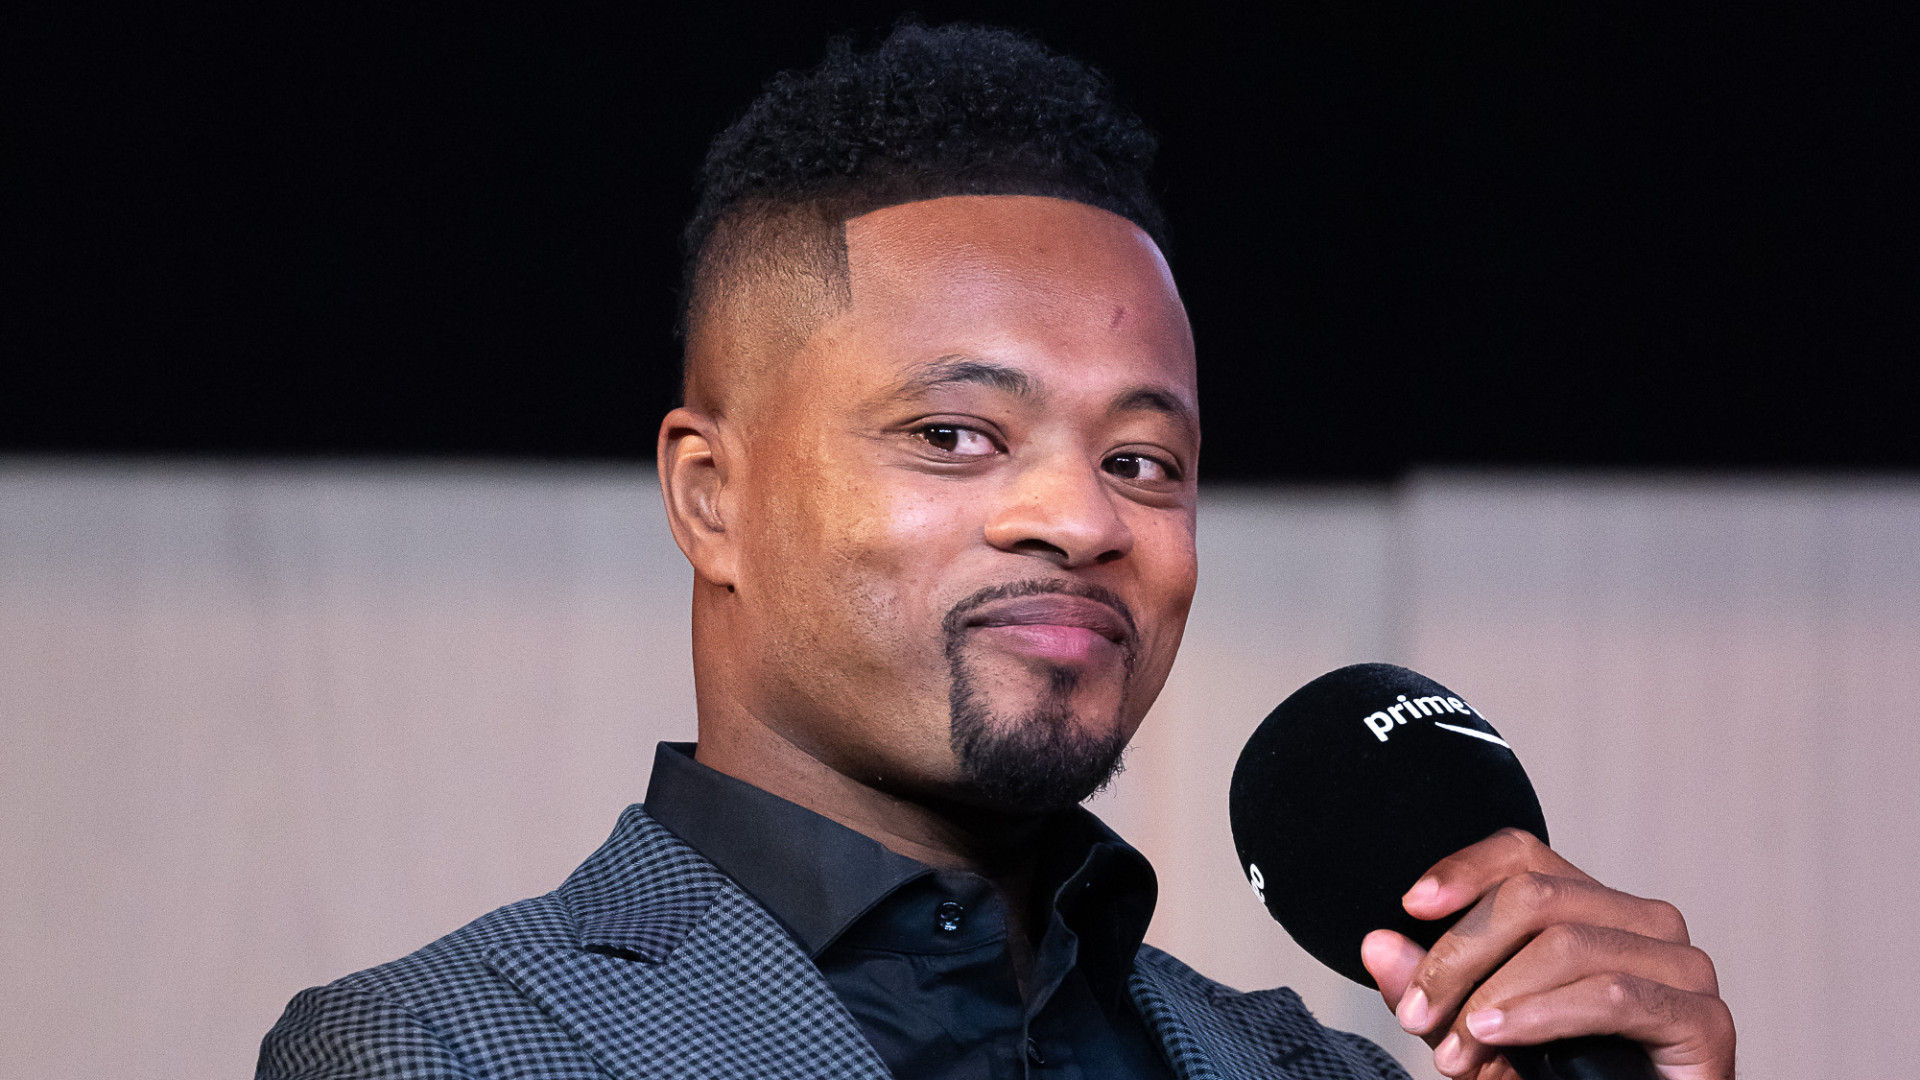 Patrice Evra: Manchester United legend to visit Ghana this month